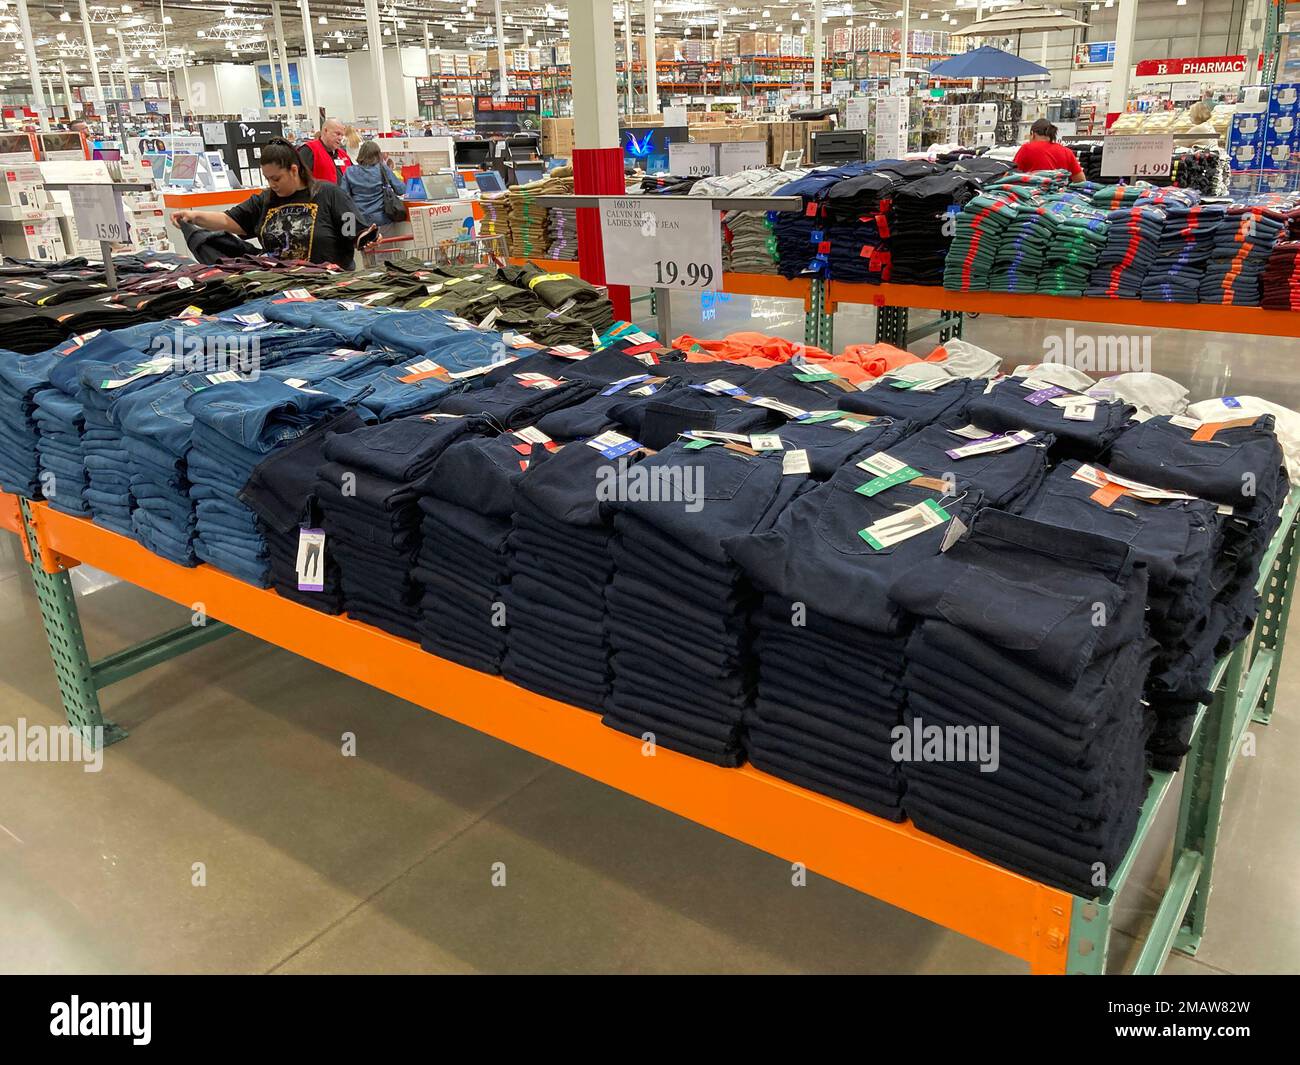 Shoppers peruse jeans on display in a Costco warehouse Monday, Aug. 15 ...